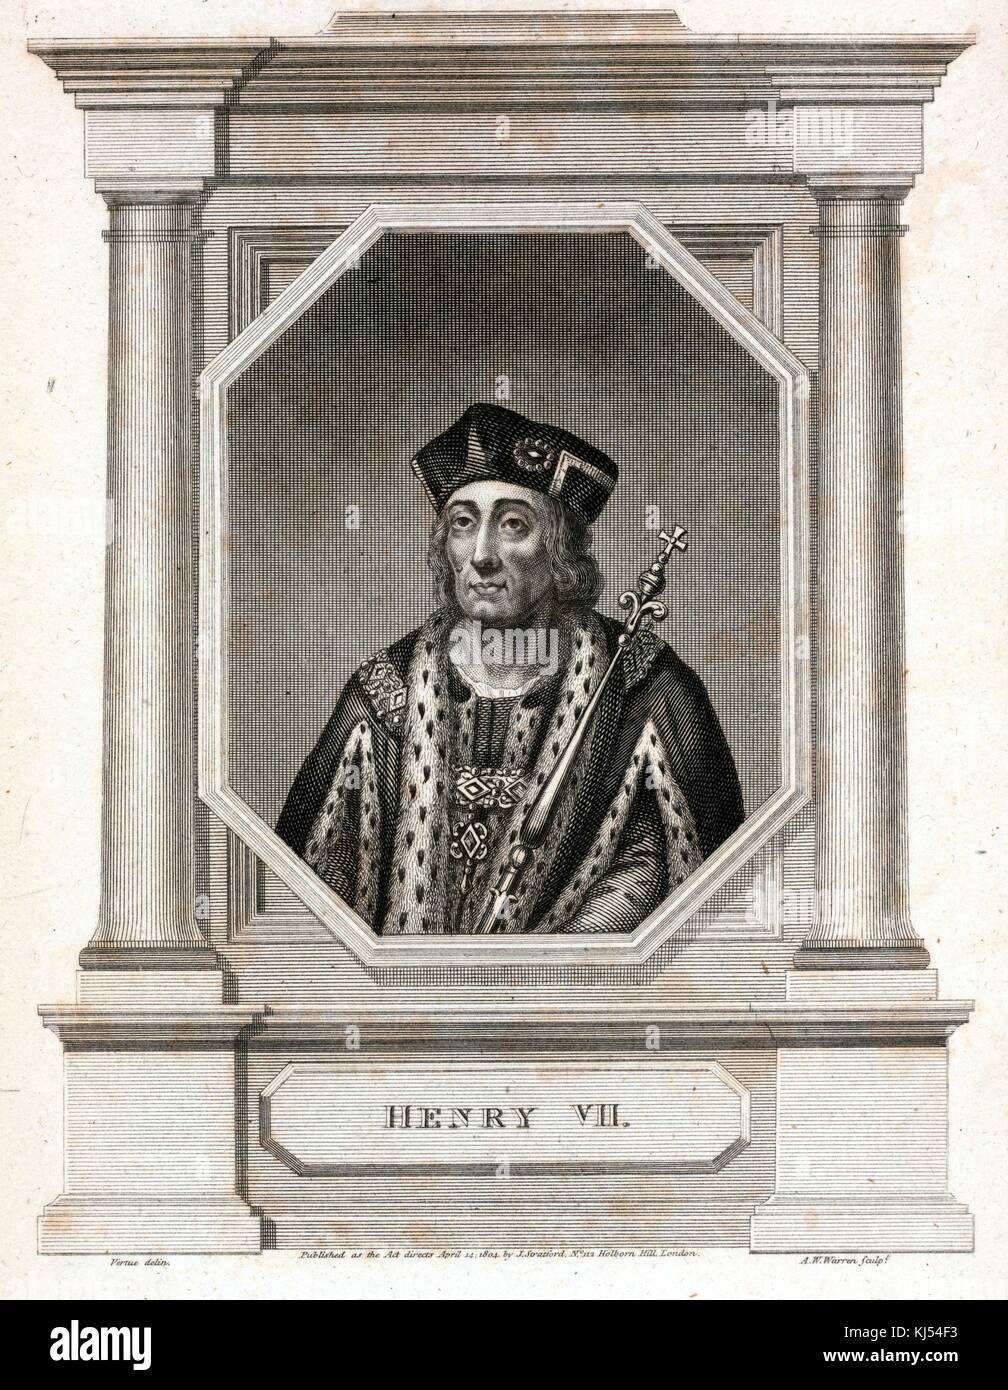 An engraving from a portrait of King Henry VII, he was the last King of England to gain power through battle, he establish the House of Tudor and is credited with restoring political stability in England, his portrait is surrounded by an illustration of a carved stone stand bearing his name, 1880. From the New York Public Library. Stock Photo